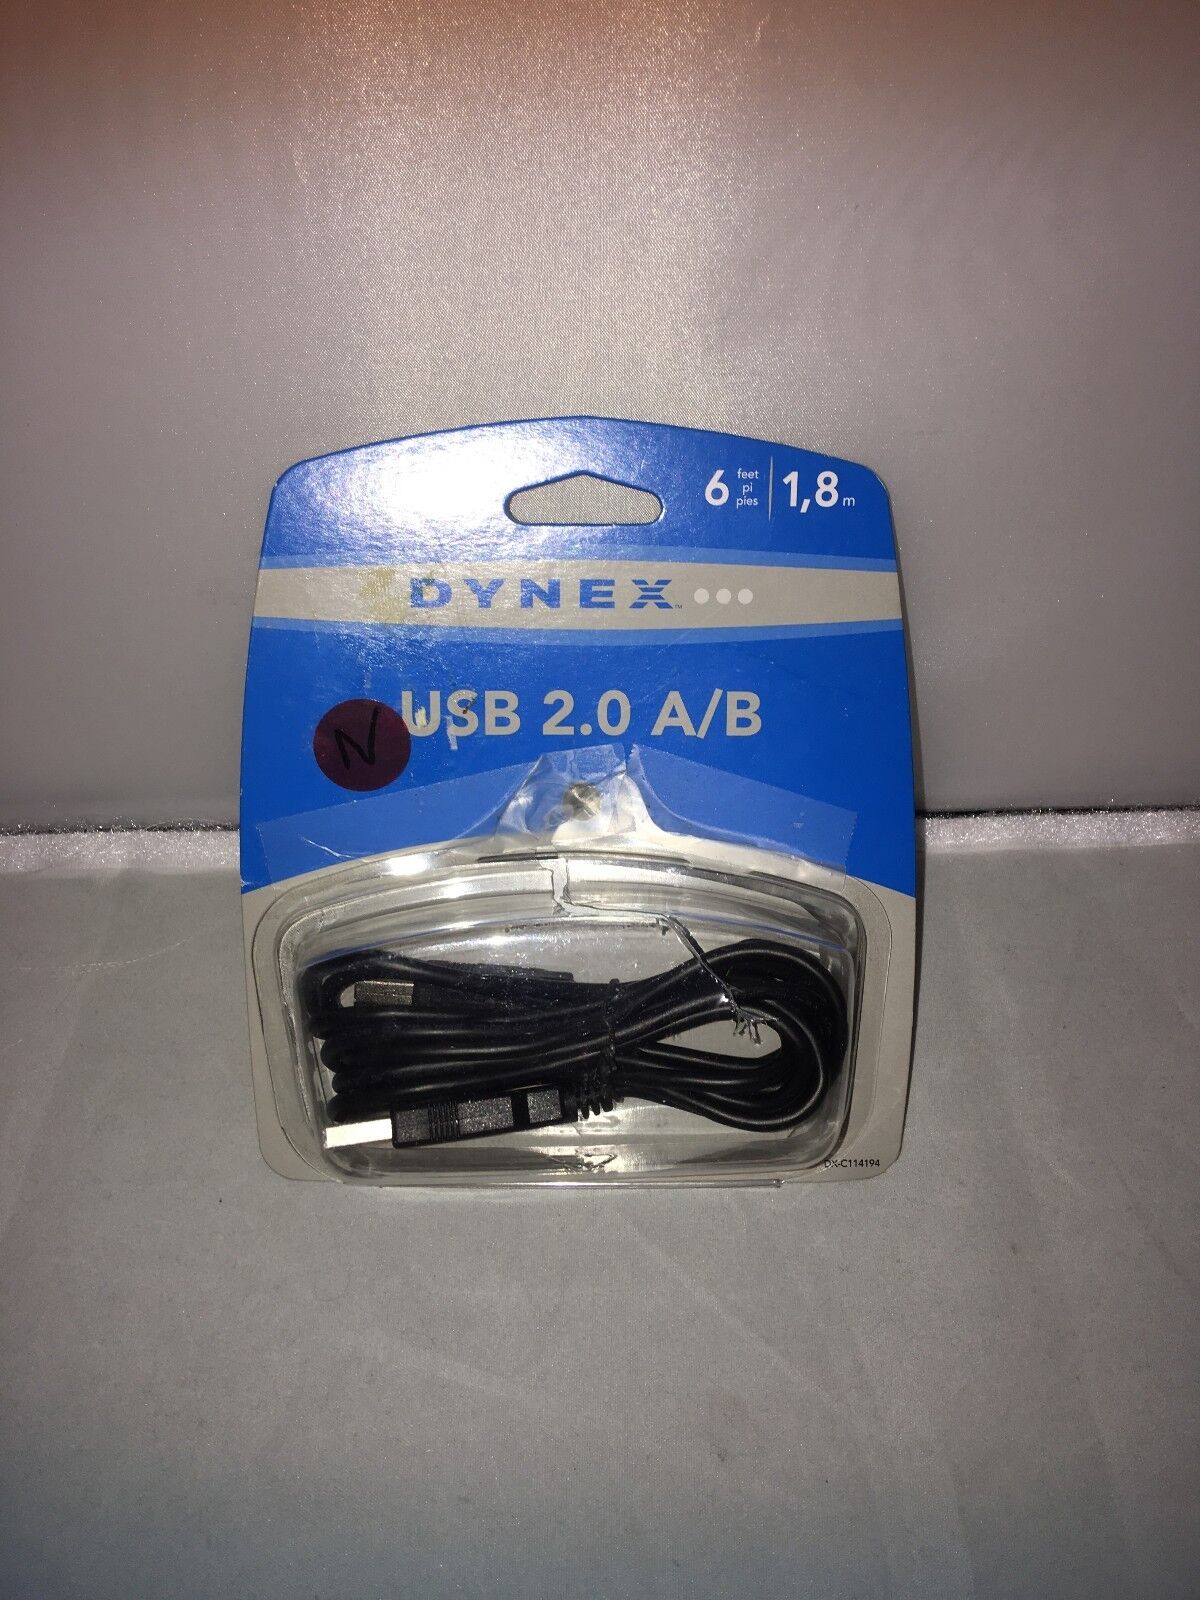 Dynex 6' USB 2.0 A/B Cable Model DX-C114194 for printers New open package 